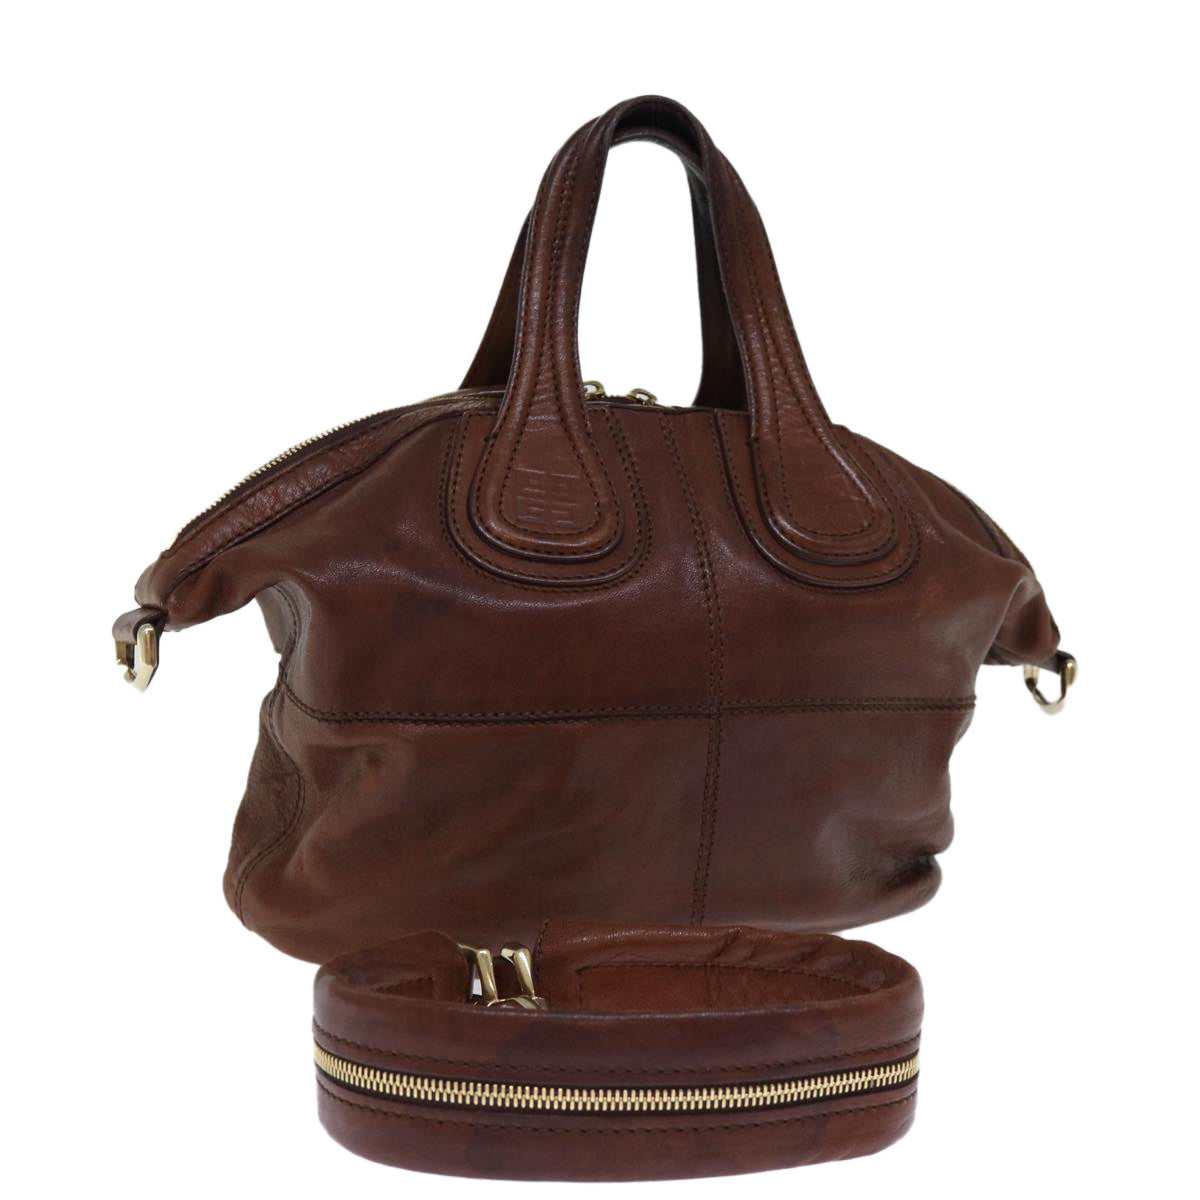 GIVENCHY Nightingale Hand Bag Leather 2way Brown Auth bs14188